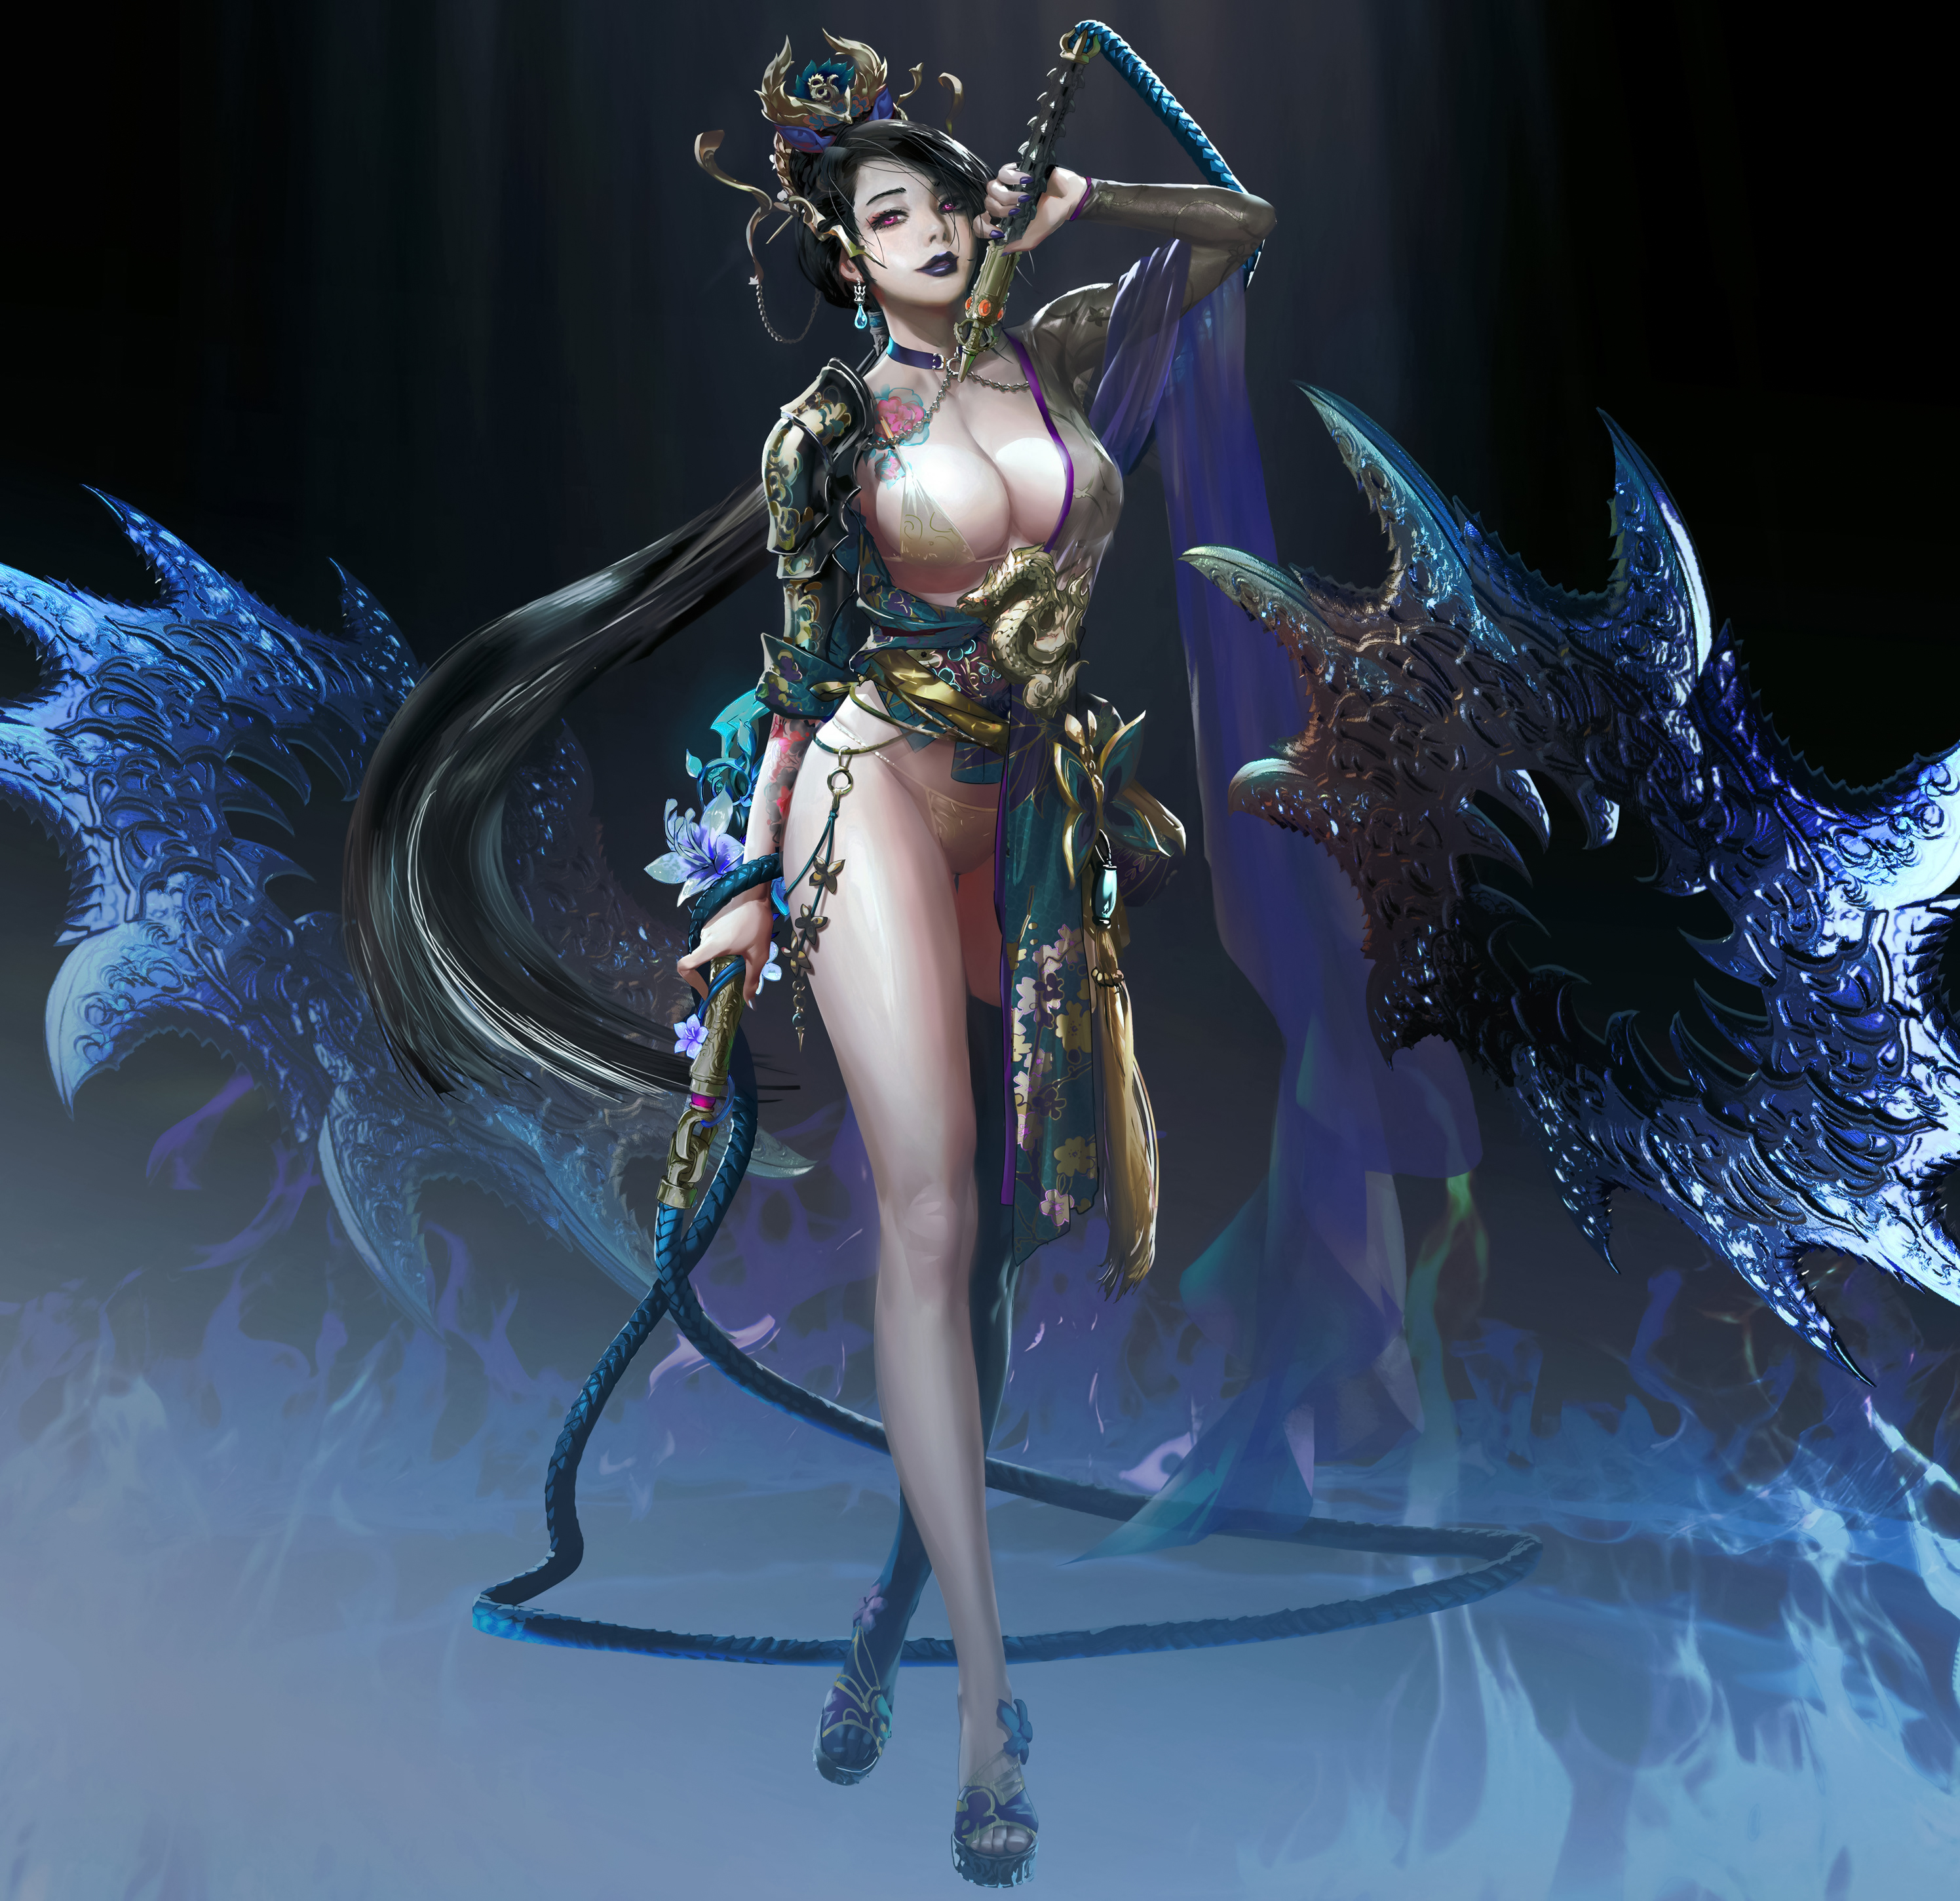 General 2991x2901 Seunghee Lee drawing women Asian hair accessories skimpy clothes lipstick weapon whips blades fantasy art blue flames